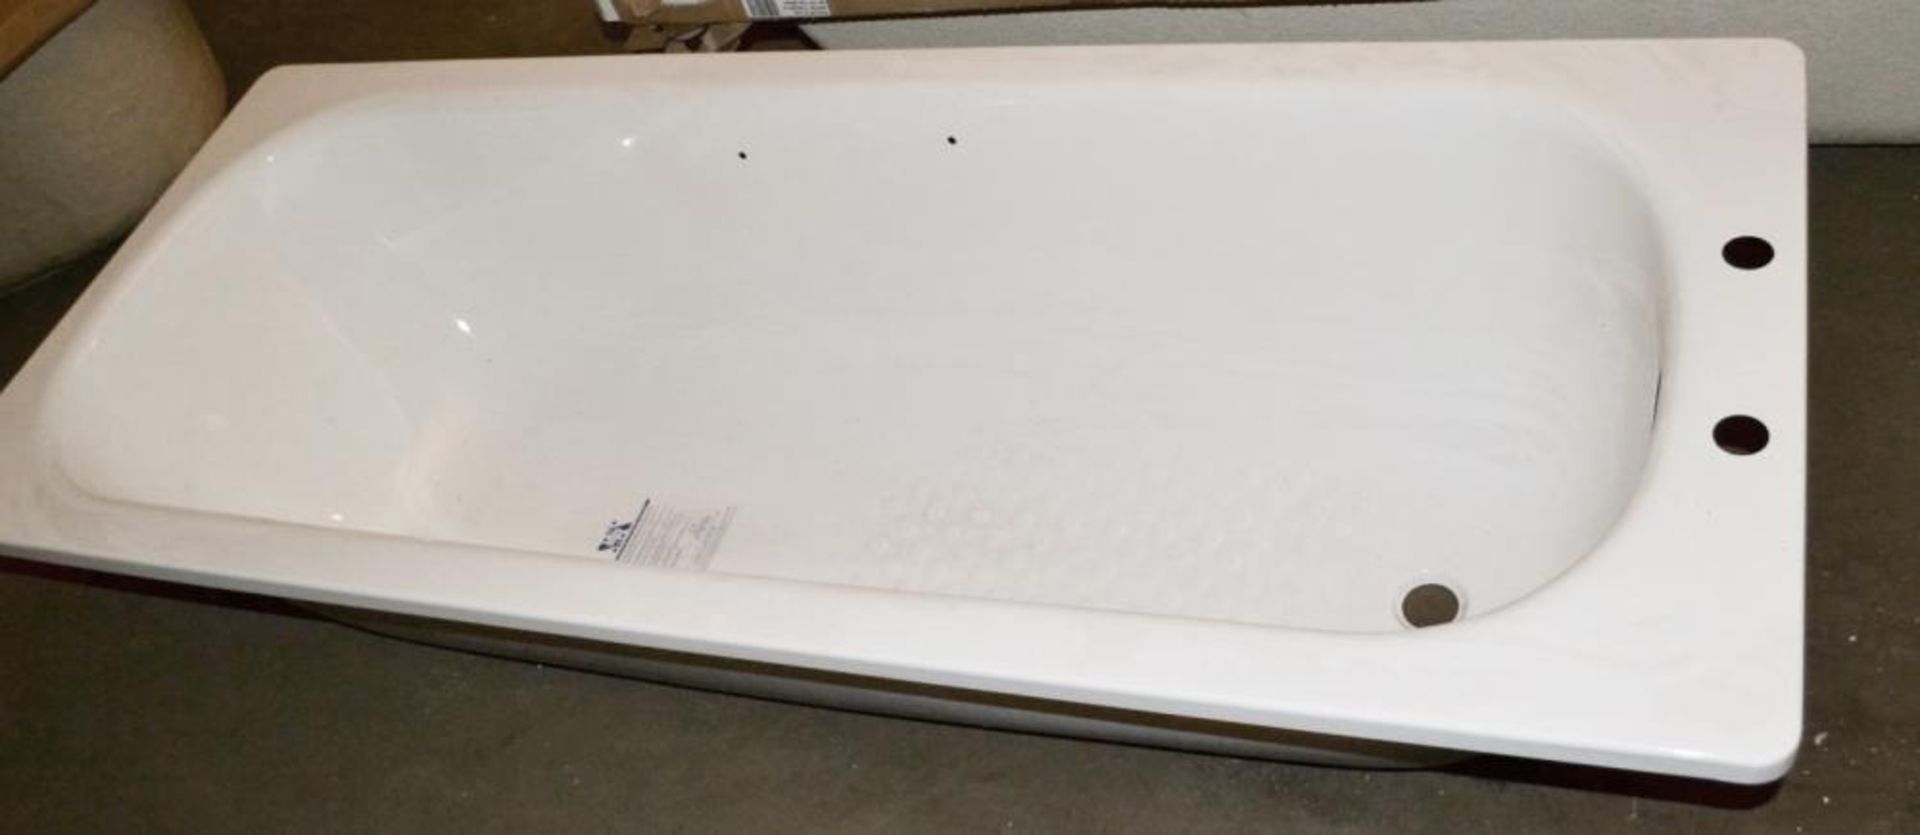 1 x Steel Bath With White Enamel Coating - Features 2 Tap Holes - Includes Box Of Fittings - New / U - Image 3 of 4